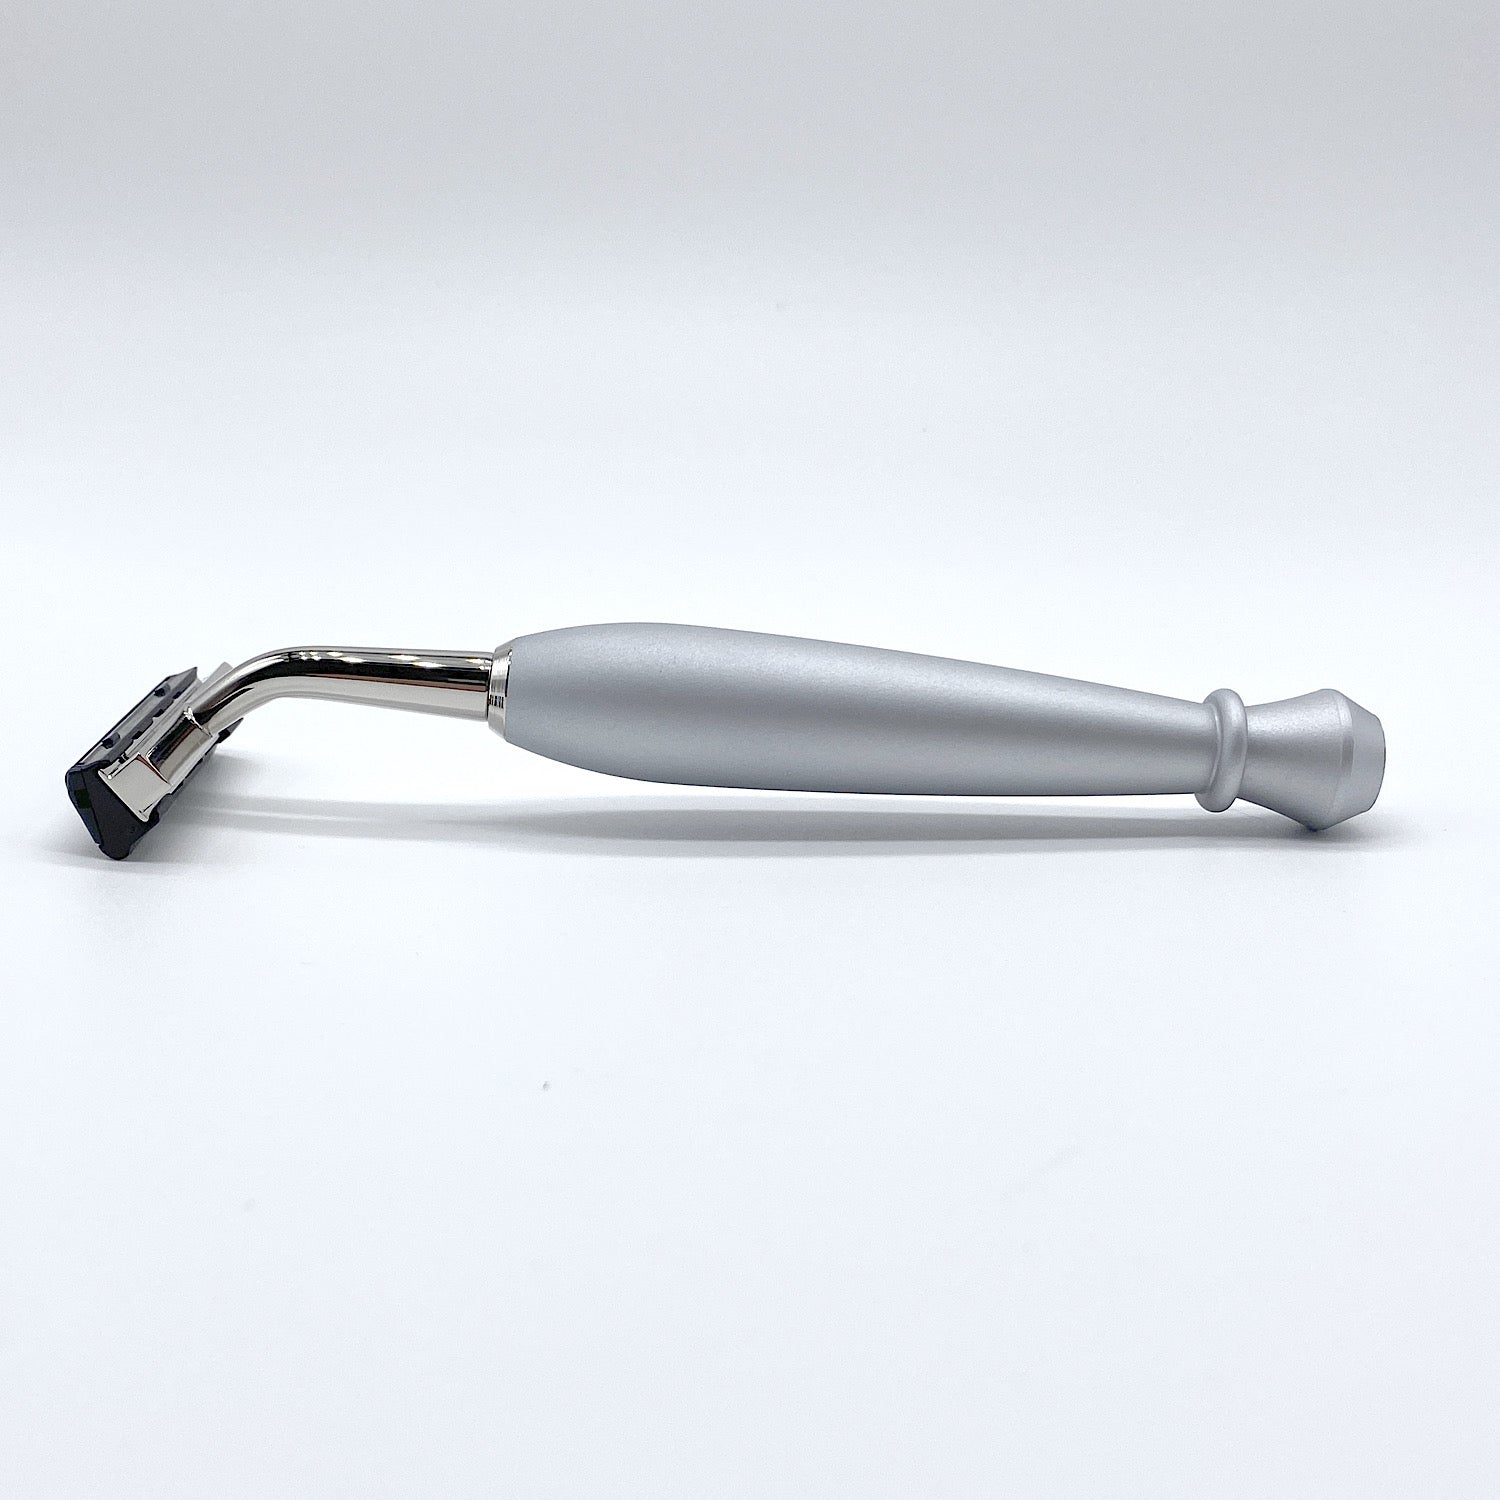 2in1 razor / RA350T OLD FLORENCE ORIGIO A recommended gift item that can use both the classical two -blade and the latest 5 -blade